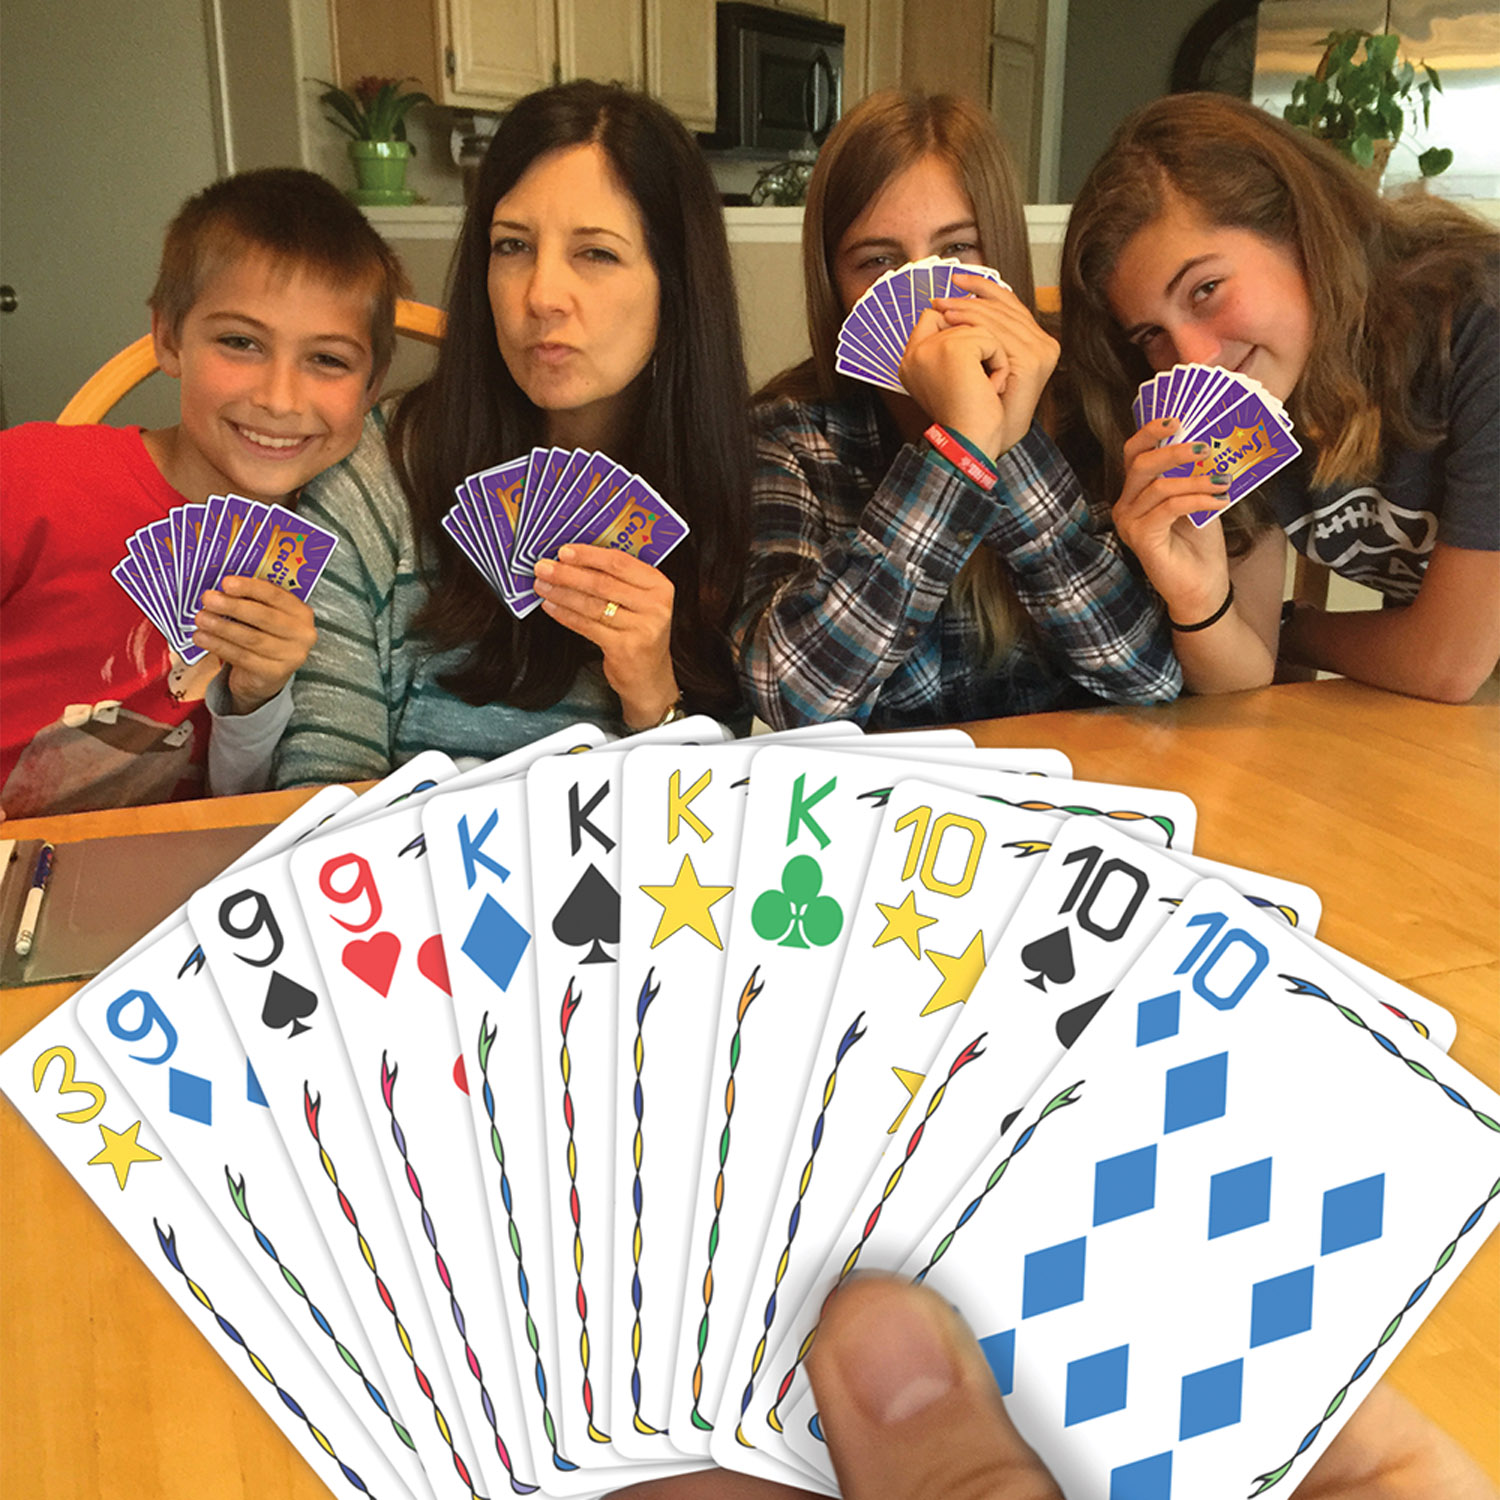 Five Crowns Card Game, Rummy Style, Kids Game, Family Game, Fun Game - image 2 of 2